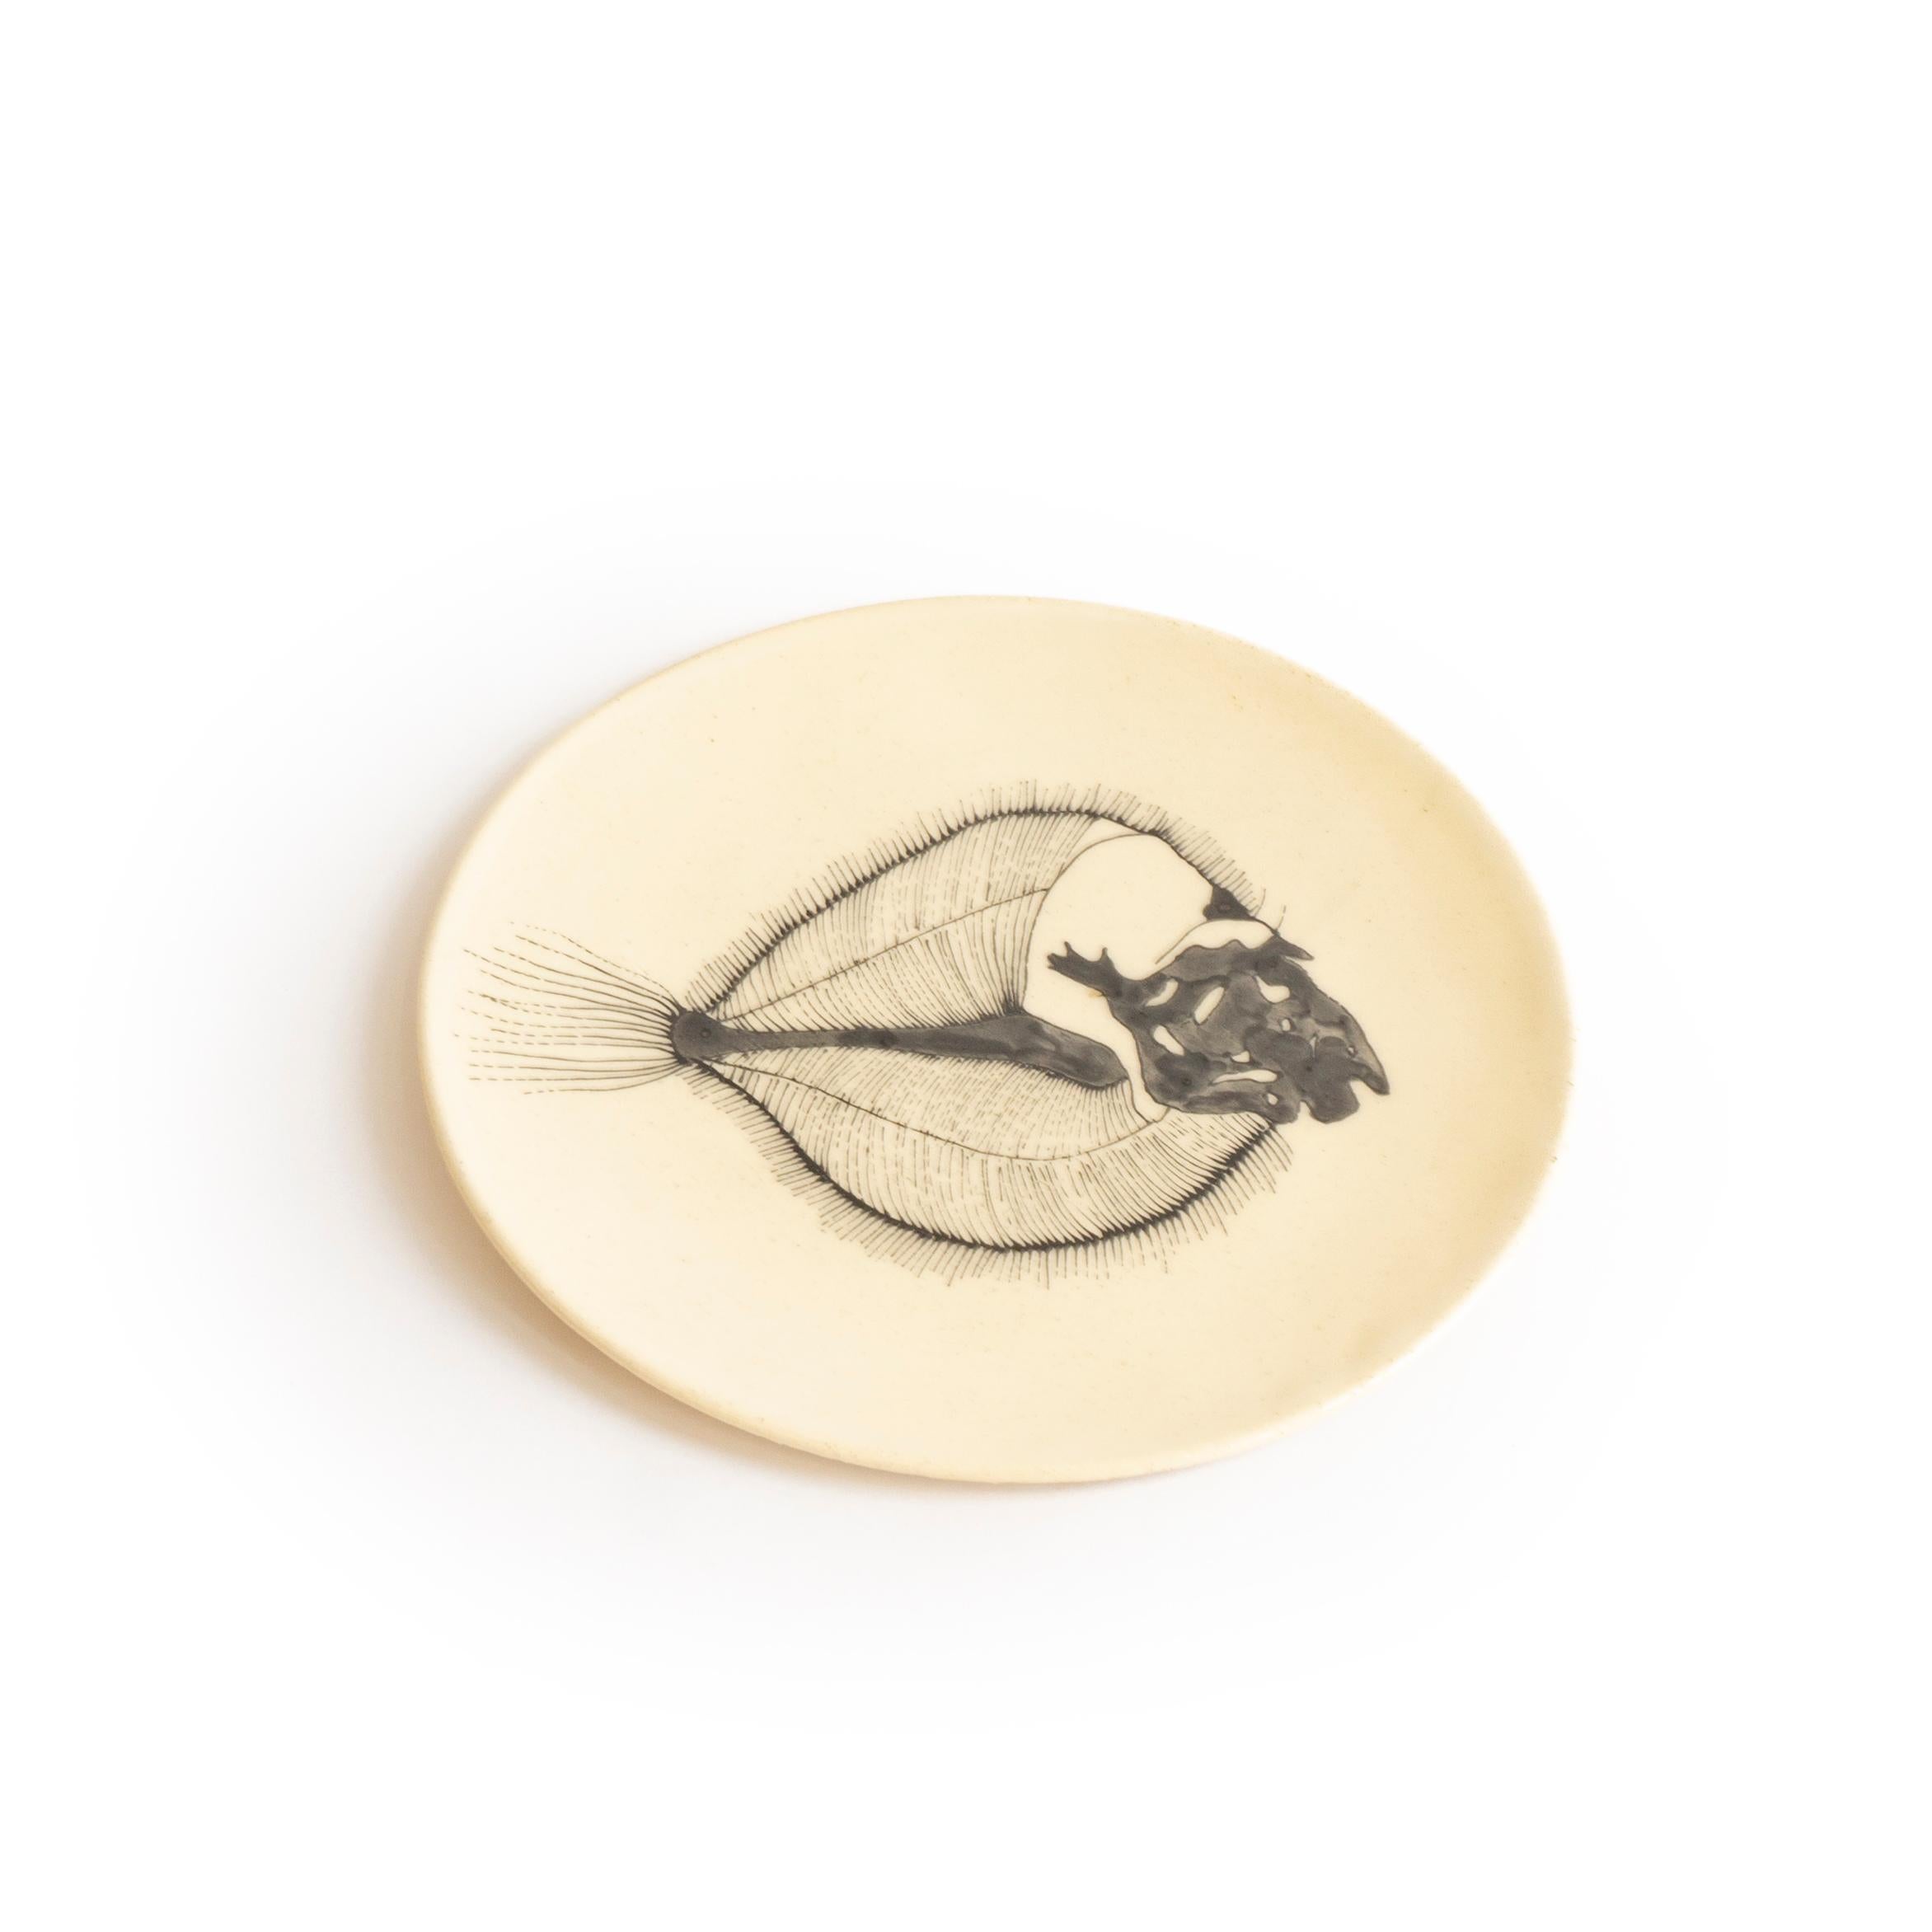 Organic Modern Small Handmade Ceramic Plates with Fish Fossil Illustration For Sale